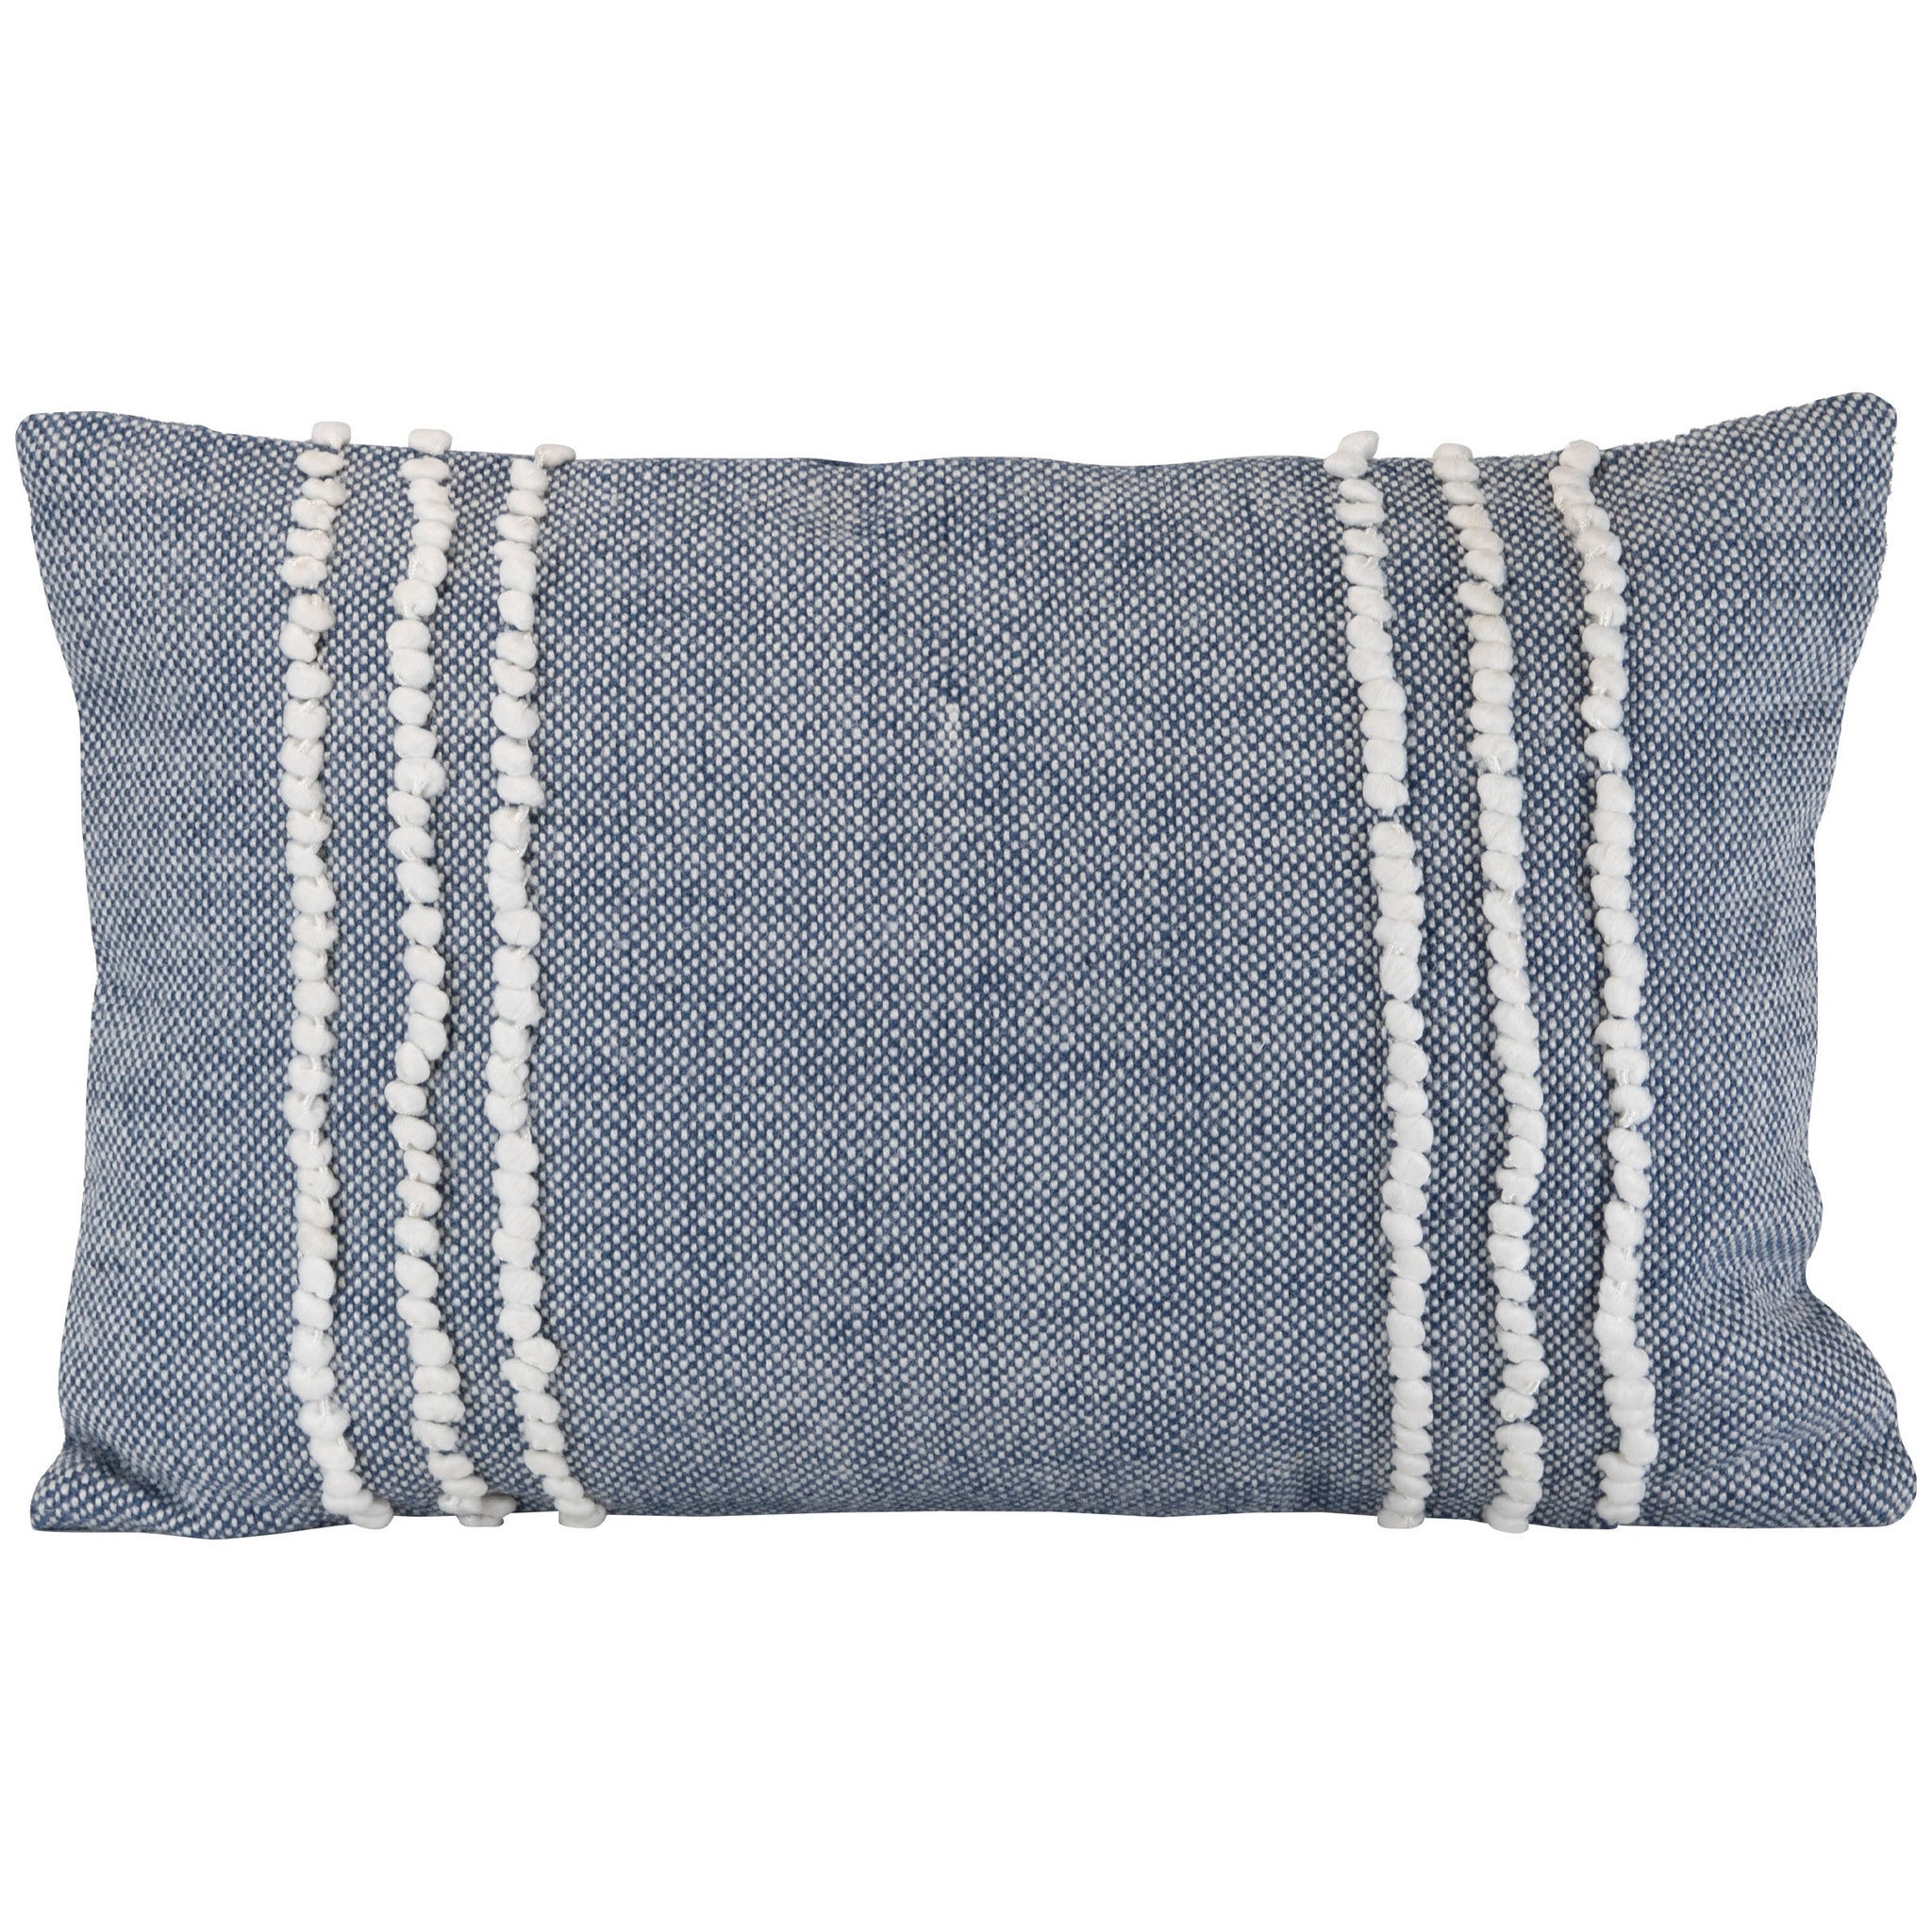 Foreside Home & Garden Blue Woven 14 x 22 inch Decorative Cotton Throw Pillow Cover with Insert and Hand Tied Tassels 